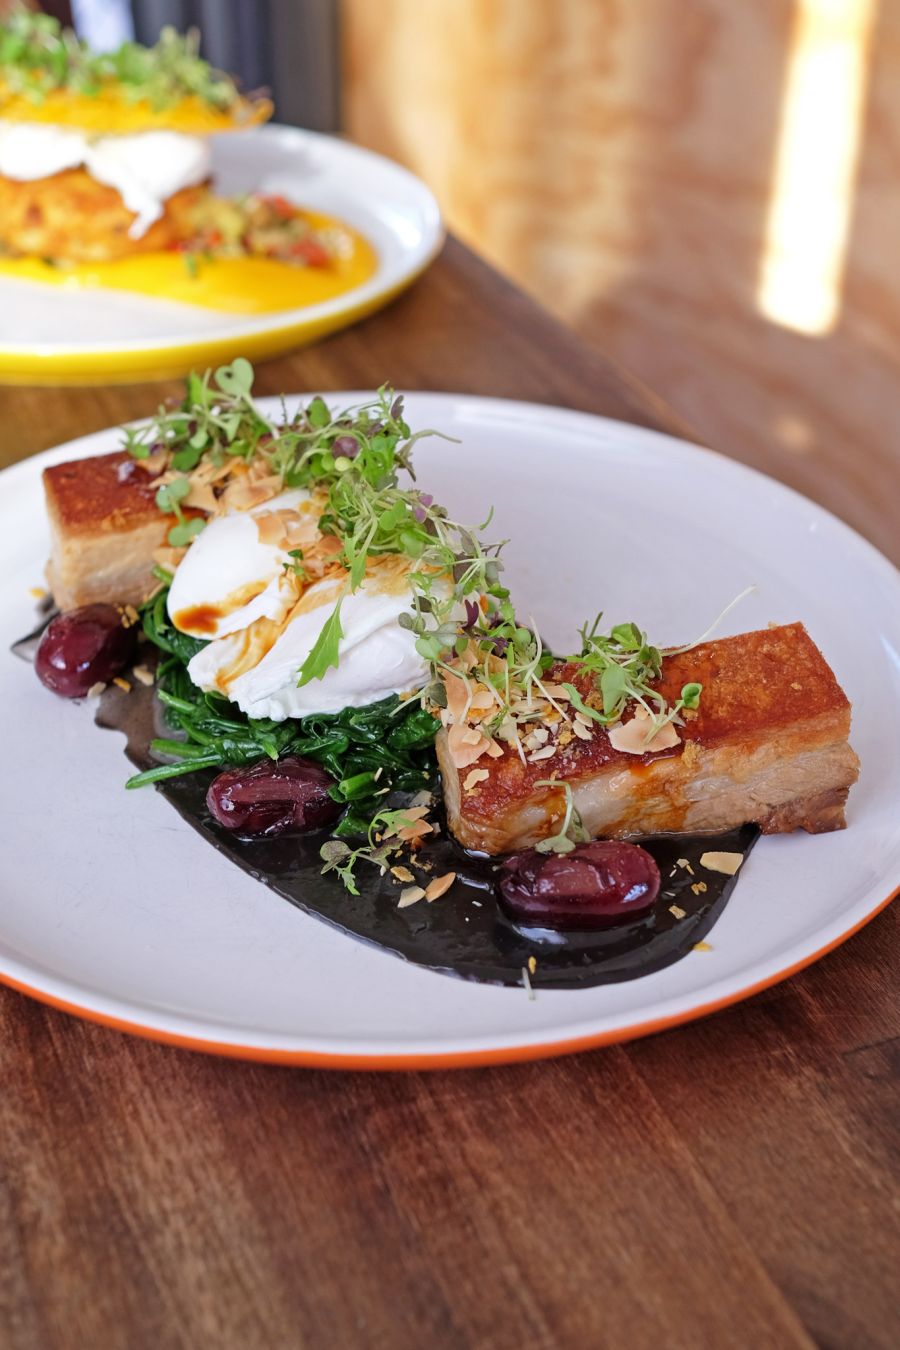 Pork Belly (AU$22.50) - two poached eggs, almond crumb, grapes, squid ink and anchovy sauce